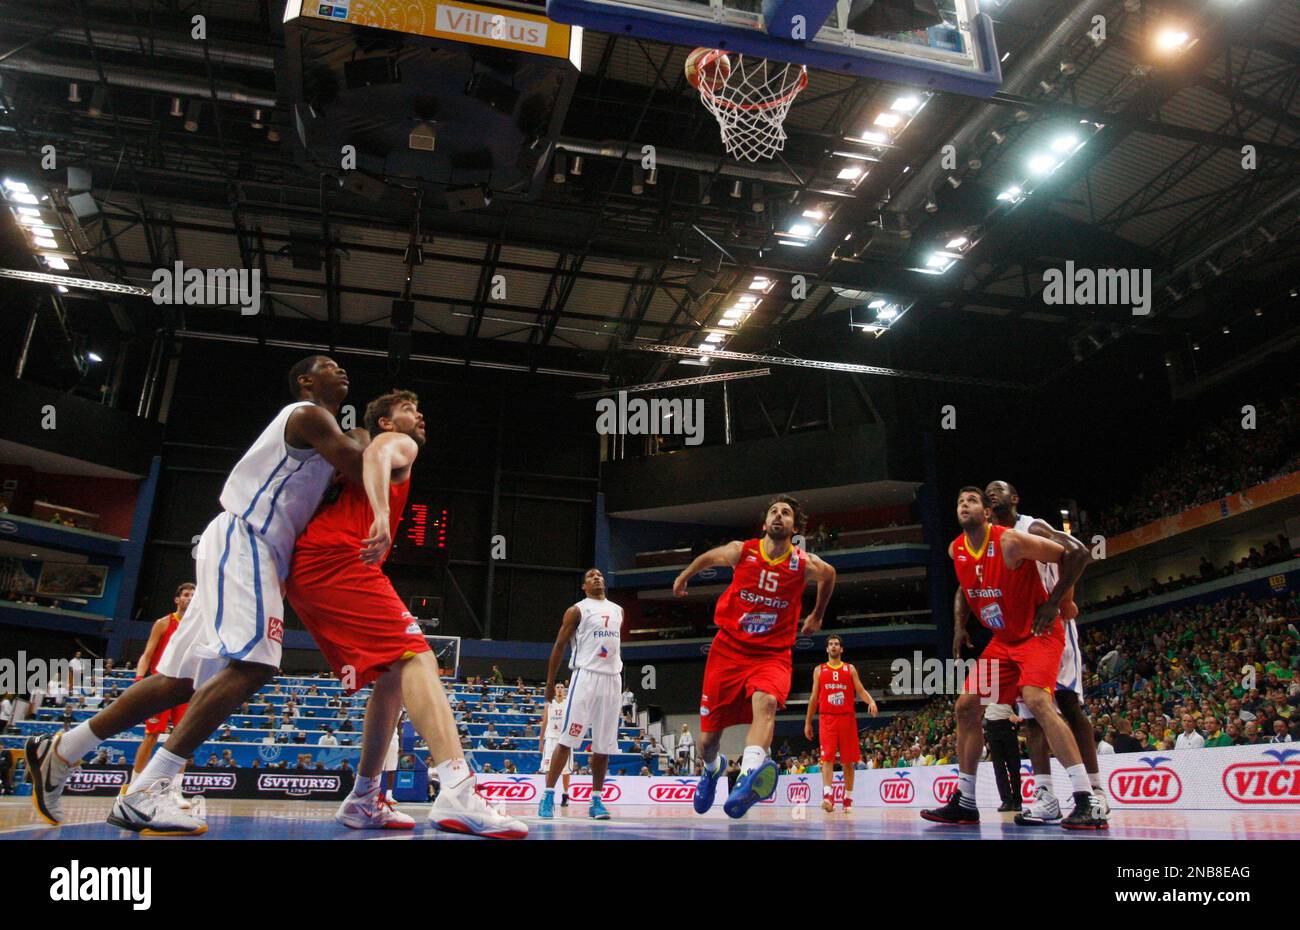 Players look on as Frances Andrew Albicy, center left, scores with a free throw during the EuroBasket European Basketball Championship Group E match against Spain in Vilnius, Lithuania, Sunday, Sept